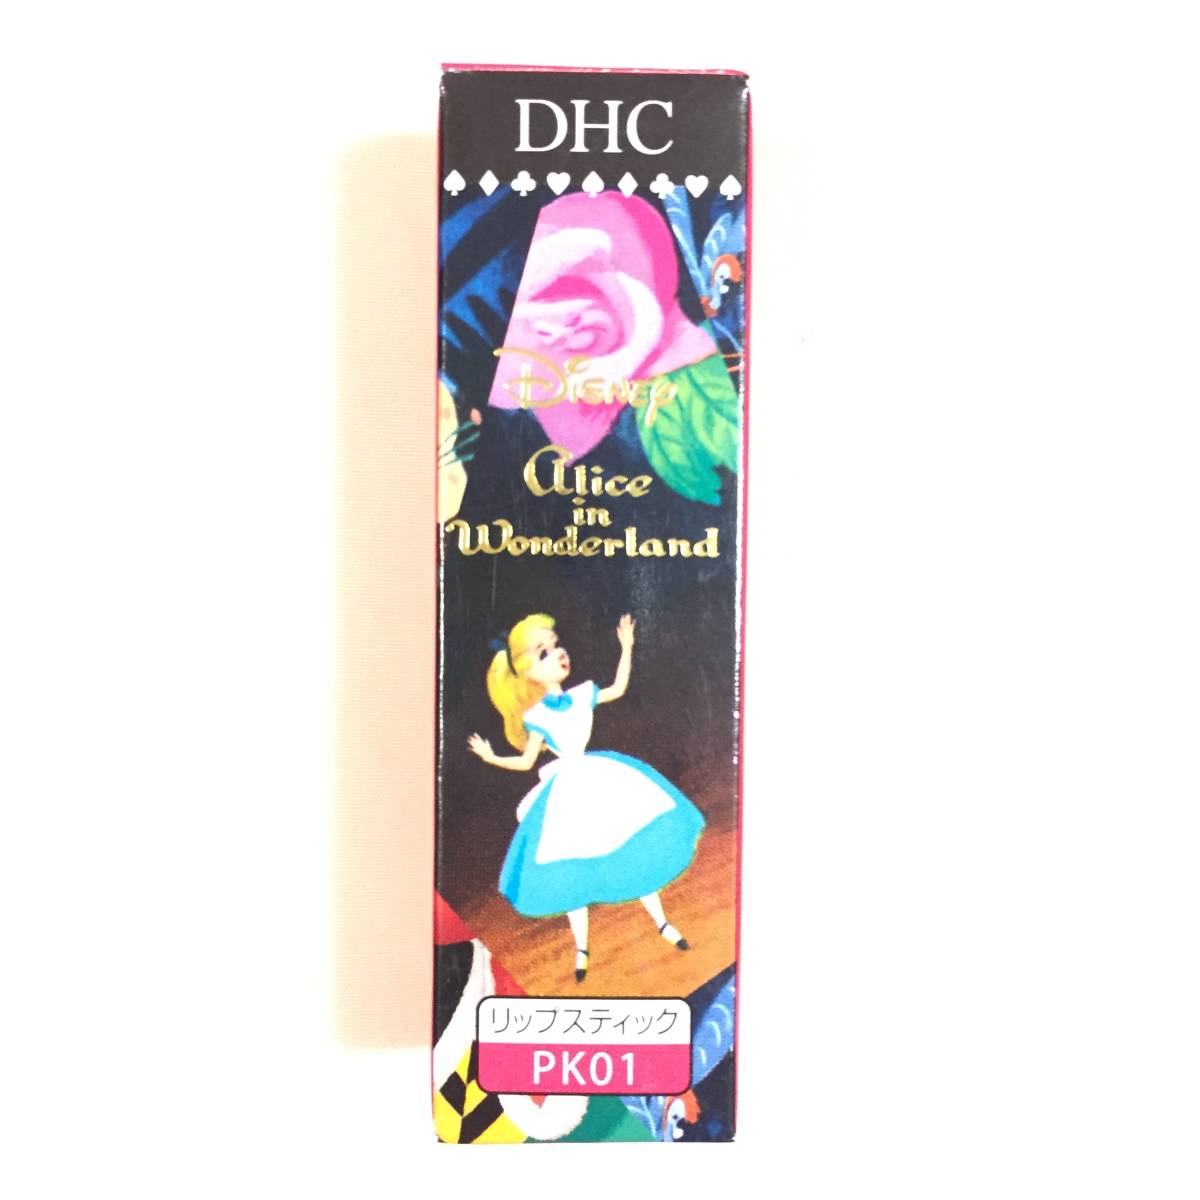  new goods limitation *DHC (ti- H si-) essence in lip color mystery. country. Alice PK01*